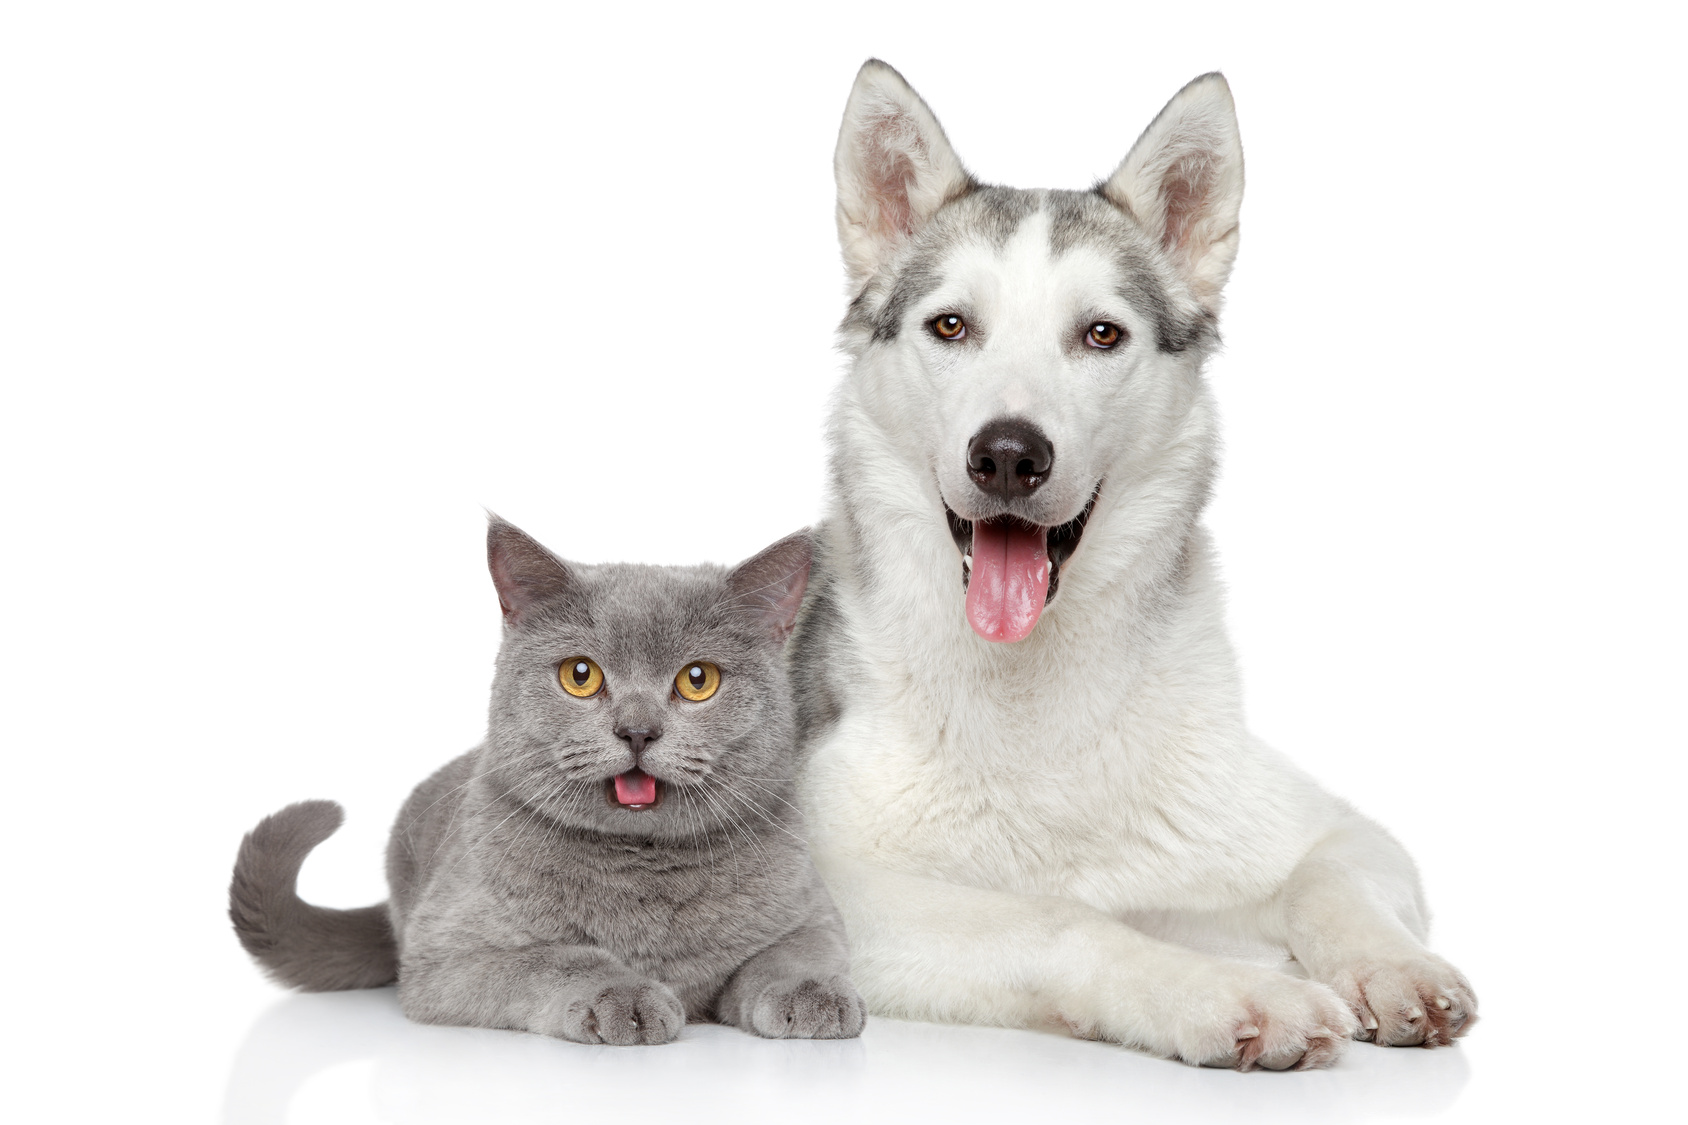 cat-and-dog-together-on-a-white-background